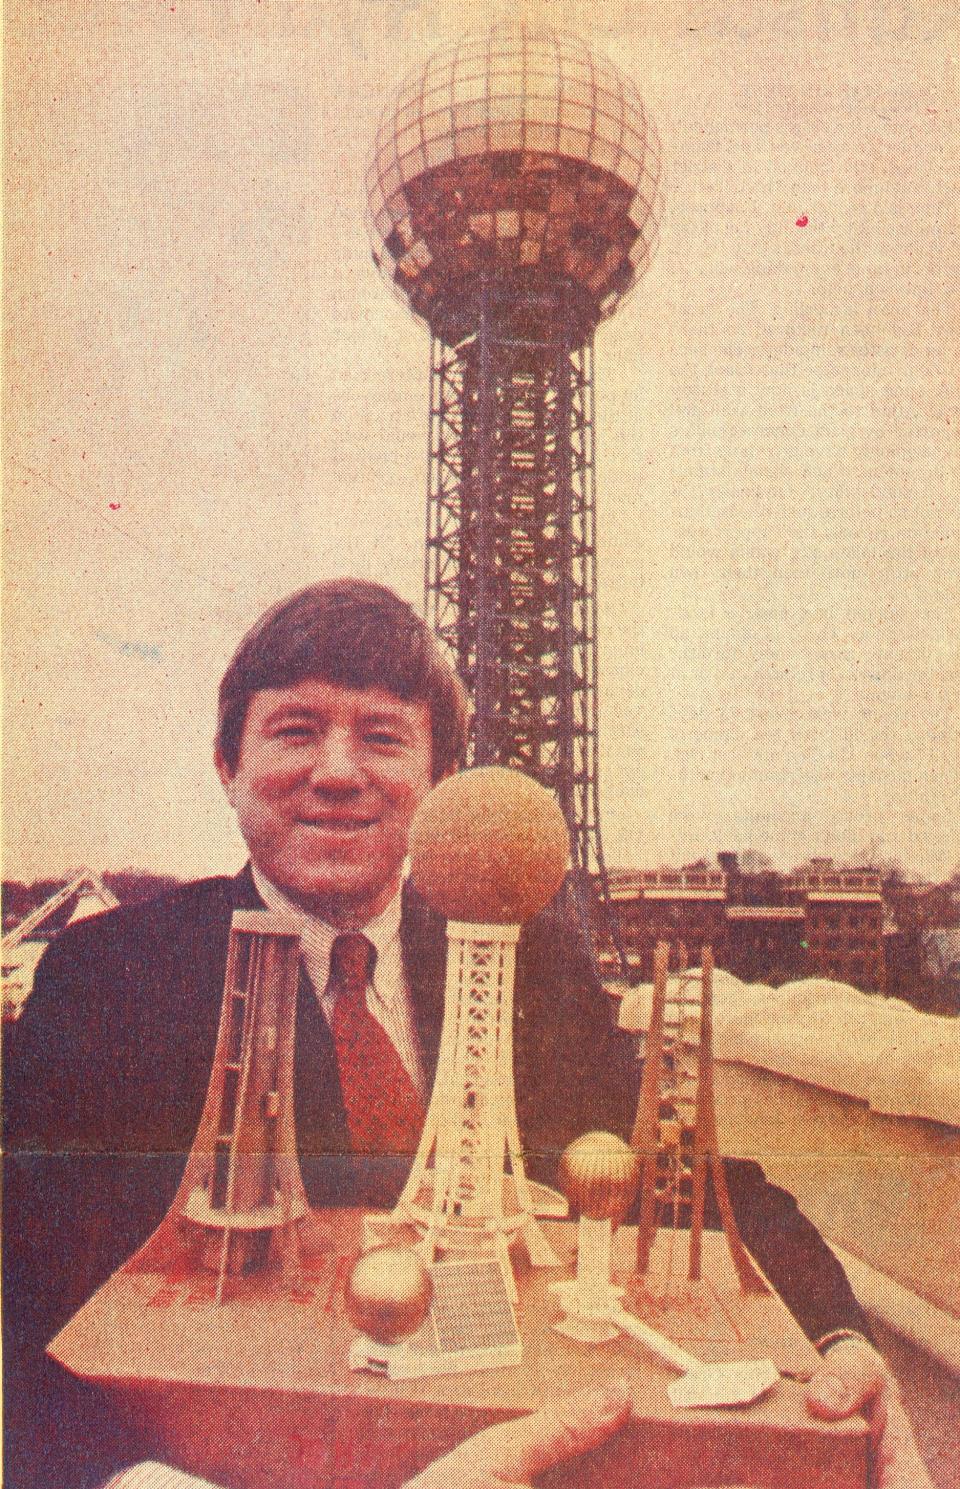 "Bill Denton displays the Sunsphere before and after models with the real McCoy in the background," reads the caption of this 1982 Knoxville News Sentinel photograph. At the time, Denton was president of Community Tectonics Architects, the company that designed the signature structure for the World's Fair in Knoxville.